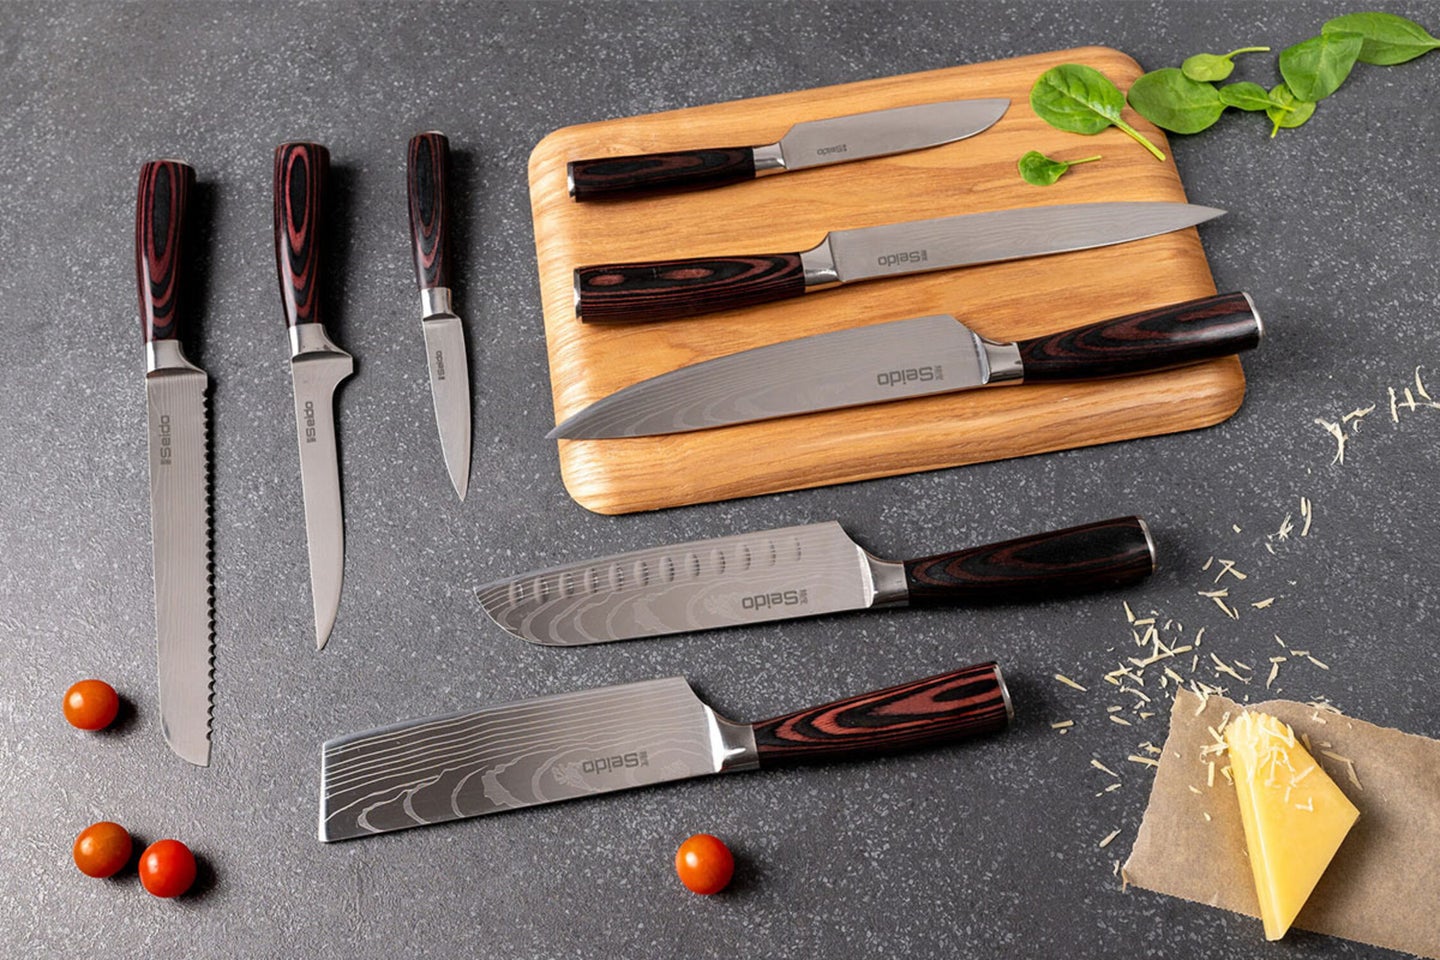 A set of Japanese cutting knives on a counter and cutting board.